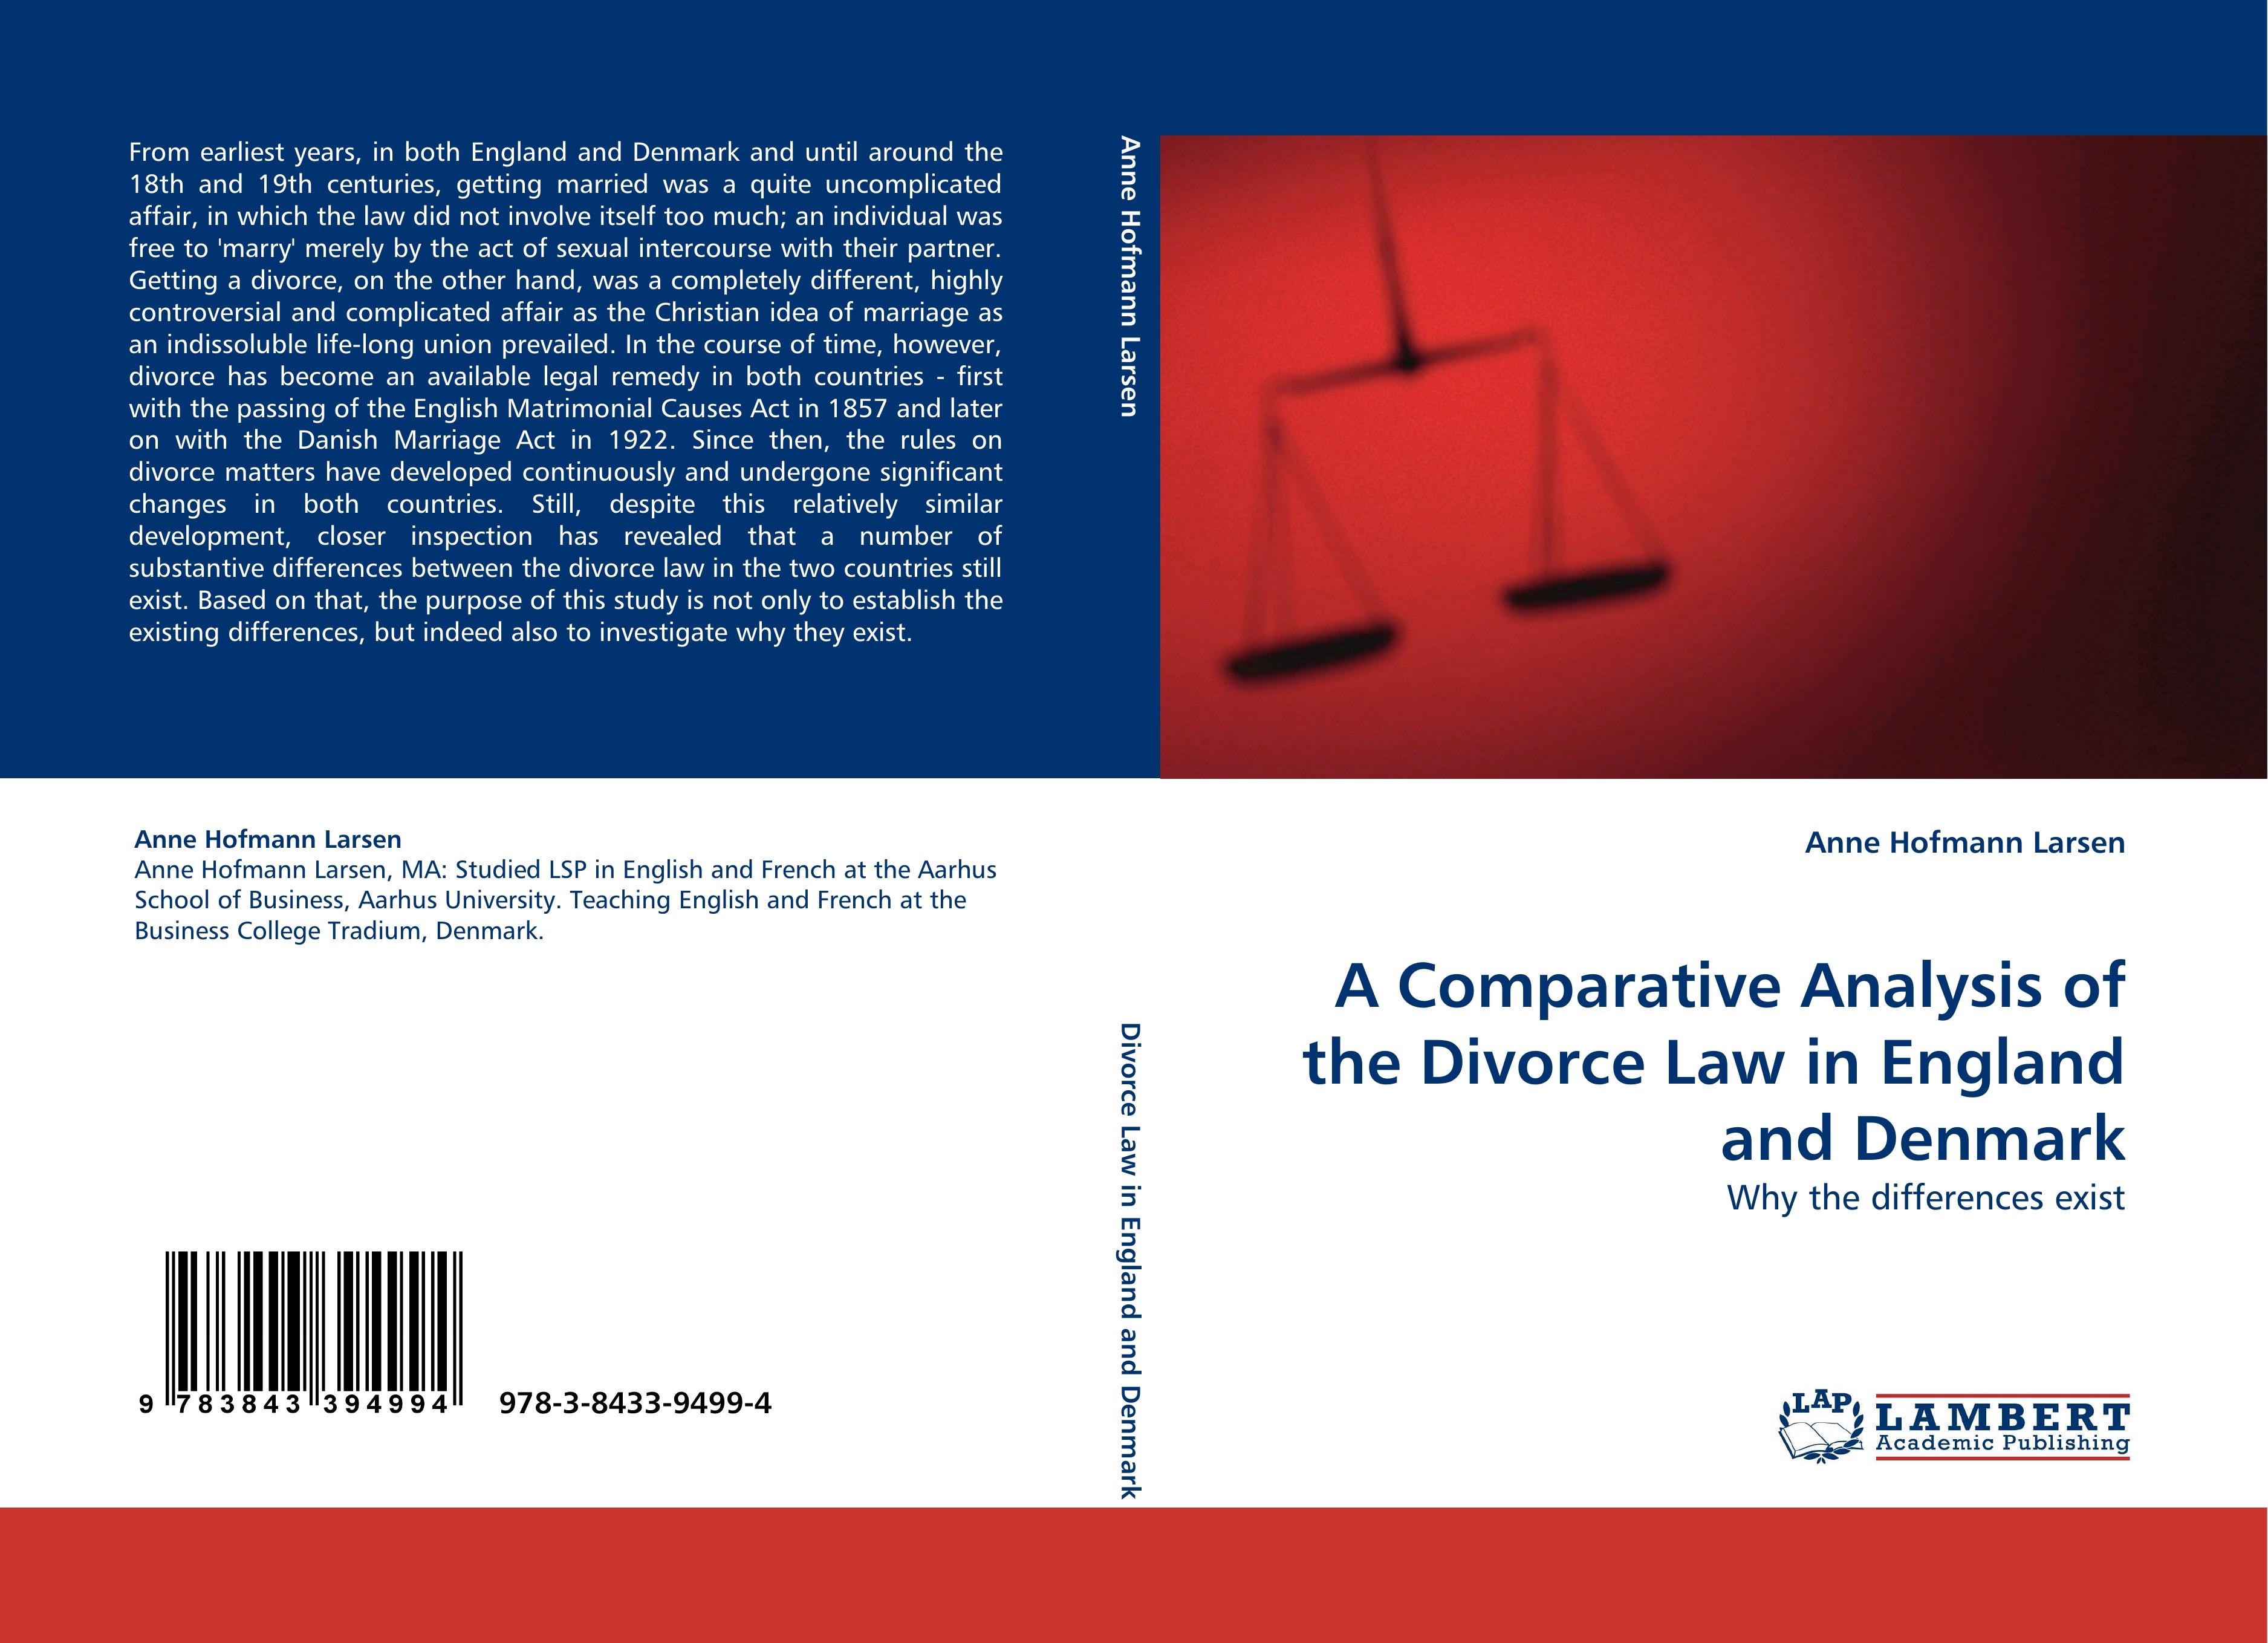 A Comparative Analysis of the Divorce Law in England and Denmark - Anne Hofmann Larsen